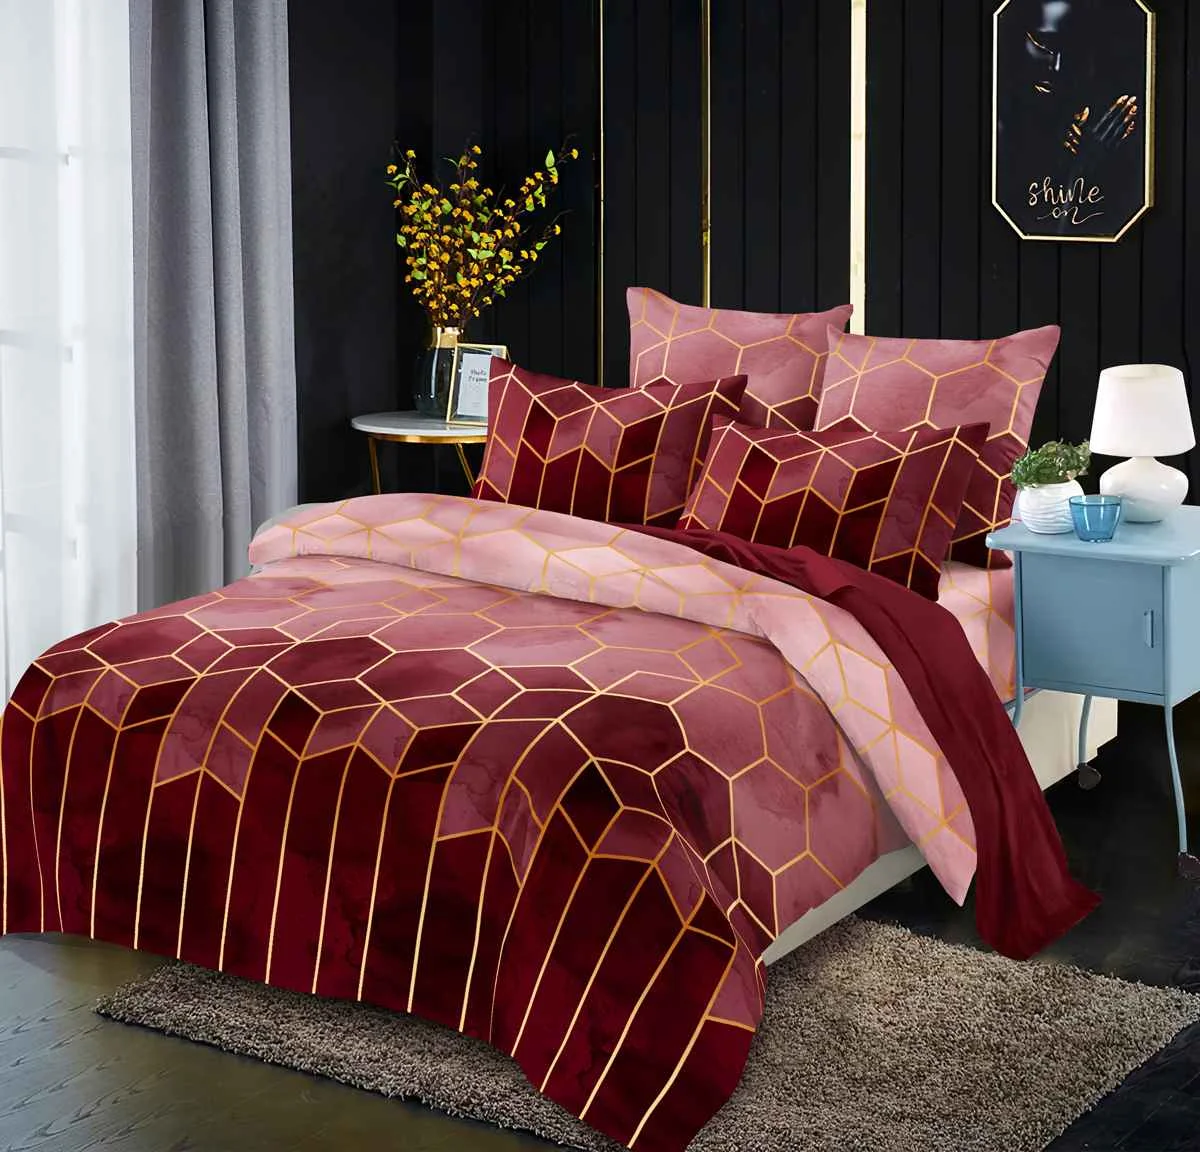 https://ae01.alicdn.com/kf/Hc2e589f5dd7044eaaa5b6fab7124df6dJ/Luxury-Duvet-Cover-Set-3pcs-Full-Queen-King-Size-Bedclothes-Bedding-Sets-Luxury-Home-Hotel-Use.jpg